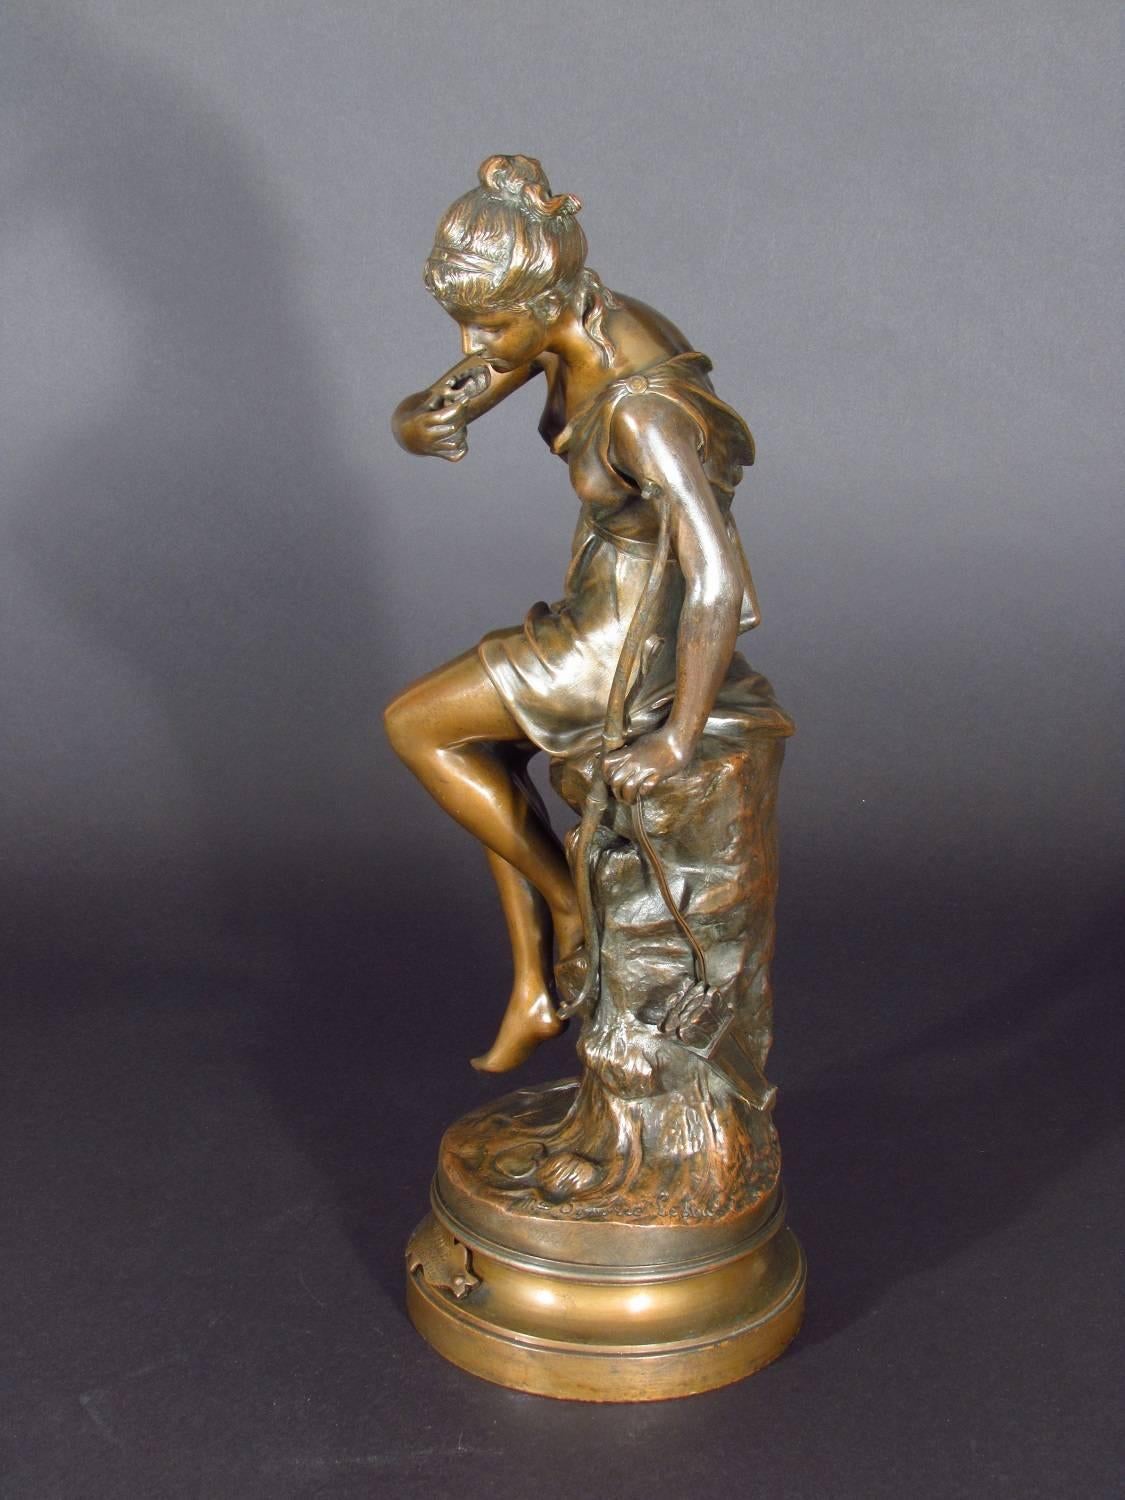 Antique bronze figure of a nymph of Diana drinking from  a spring - the source. 
 Diana was the Greek/Roman goddess of the moon, nature and the hunt.

Plaque to base inscribed: Source par Mme. Signoret-Ledieu  Recompensée au Salon

                 